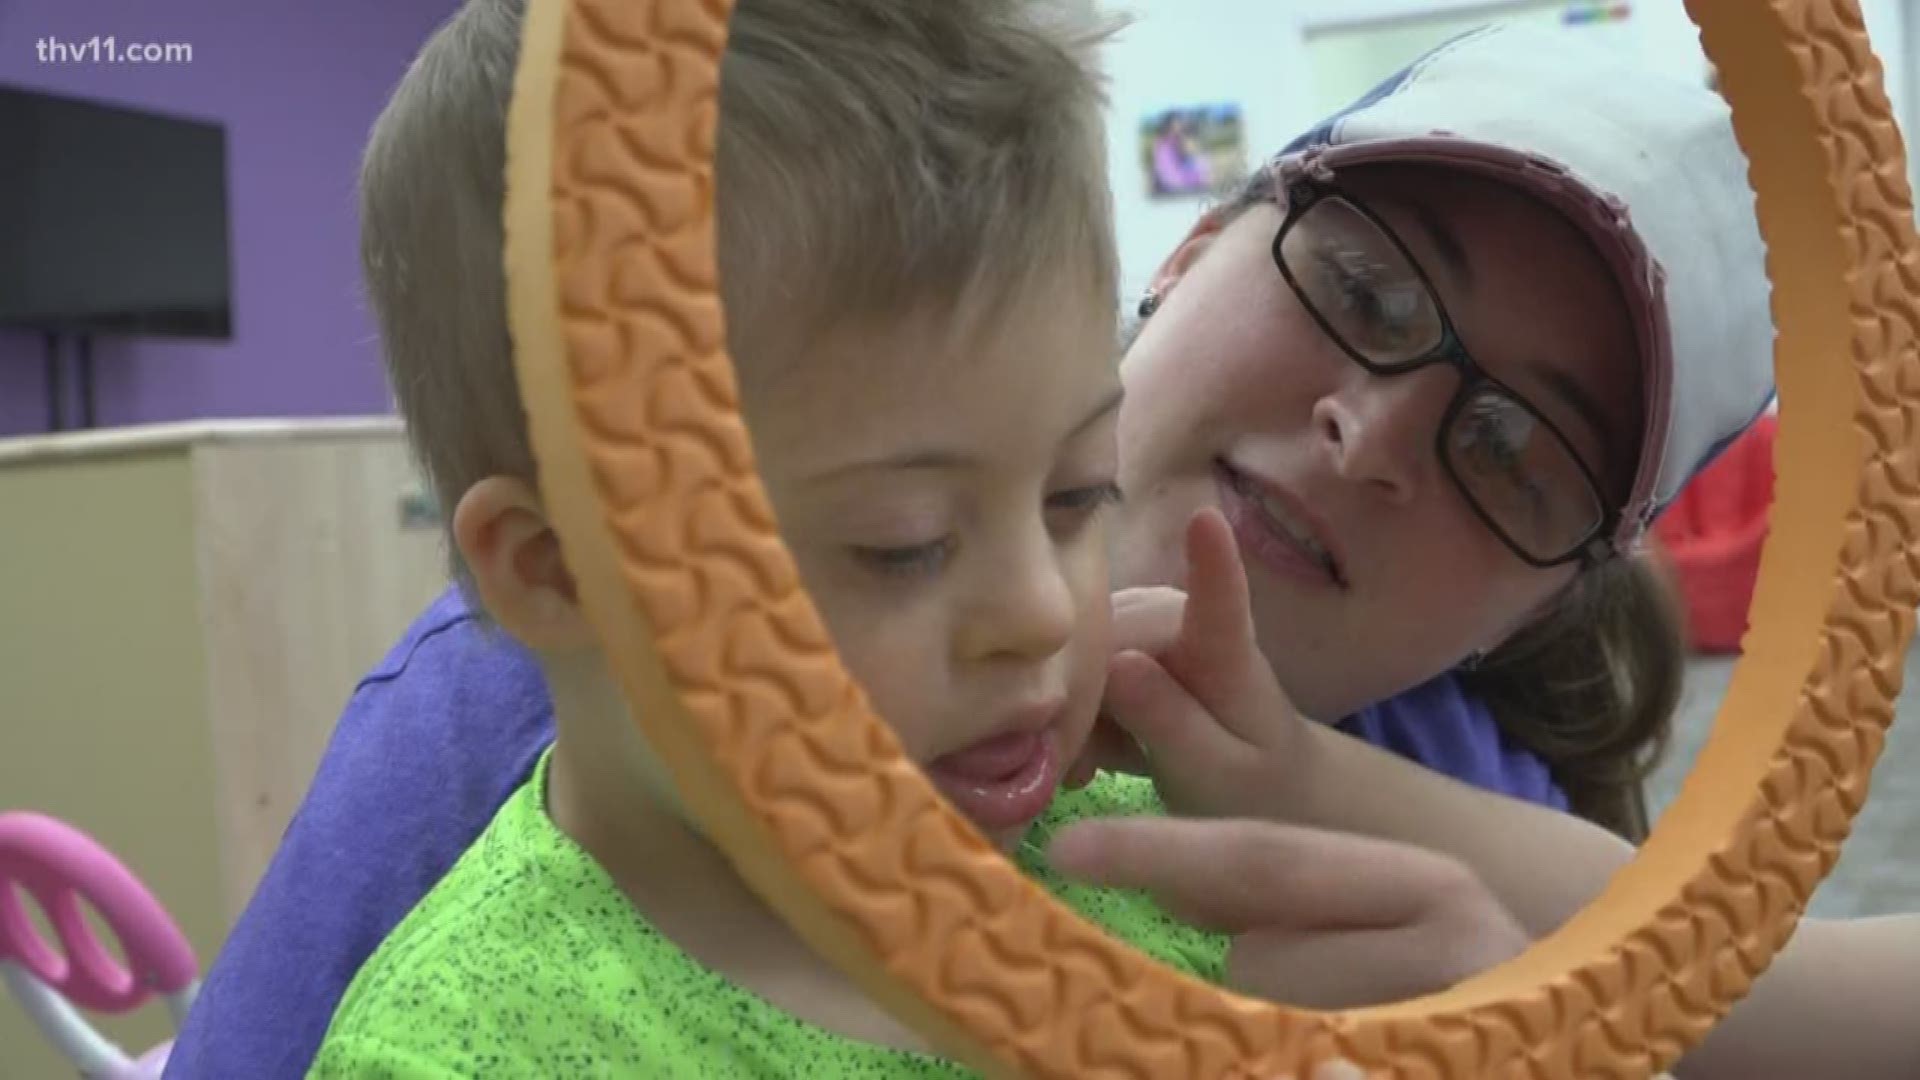 It's not easy to change the way the world views those living with Down Syndrome. But one Little Rock organization is up for the challenge and is giving those with down syndrome and their families a welcoming space to call home.